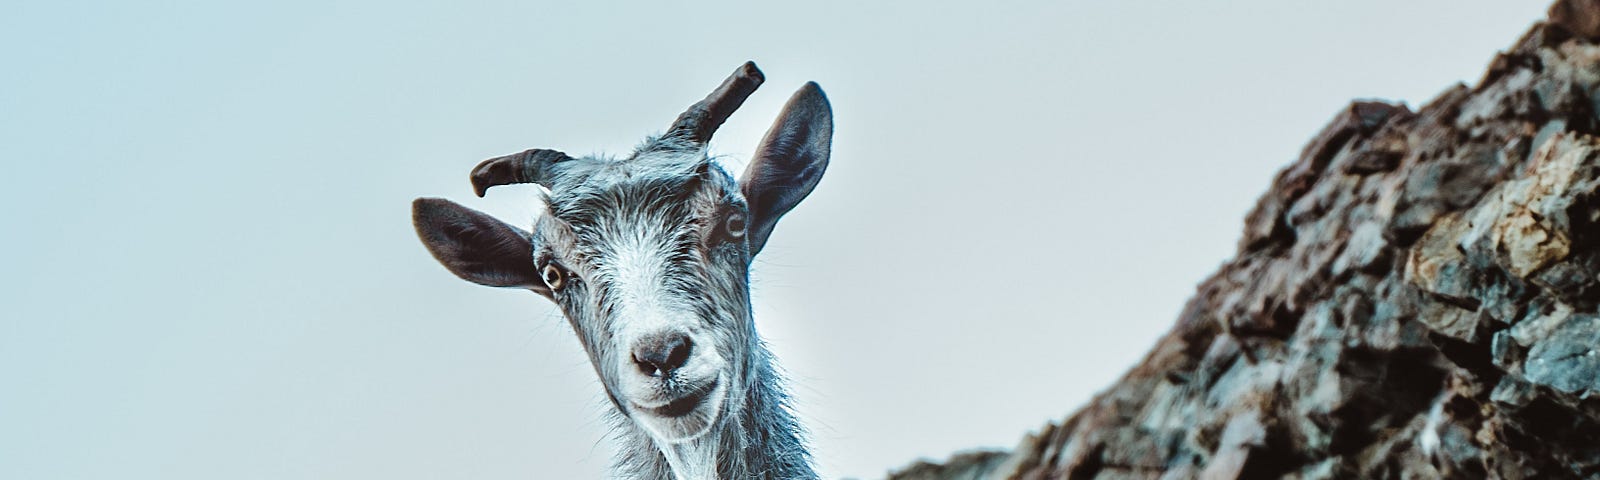 The image shows a goat staring at you from a rocky mountain ledge.